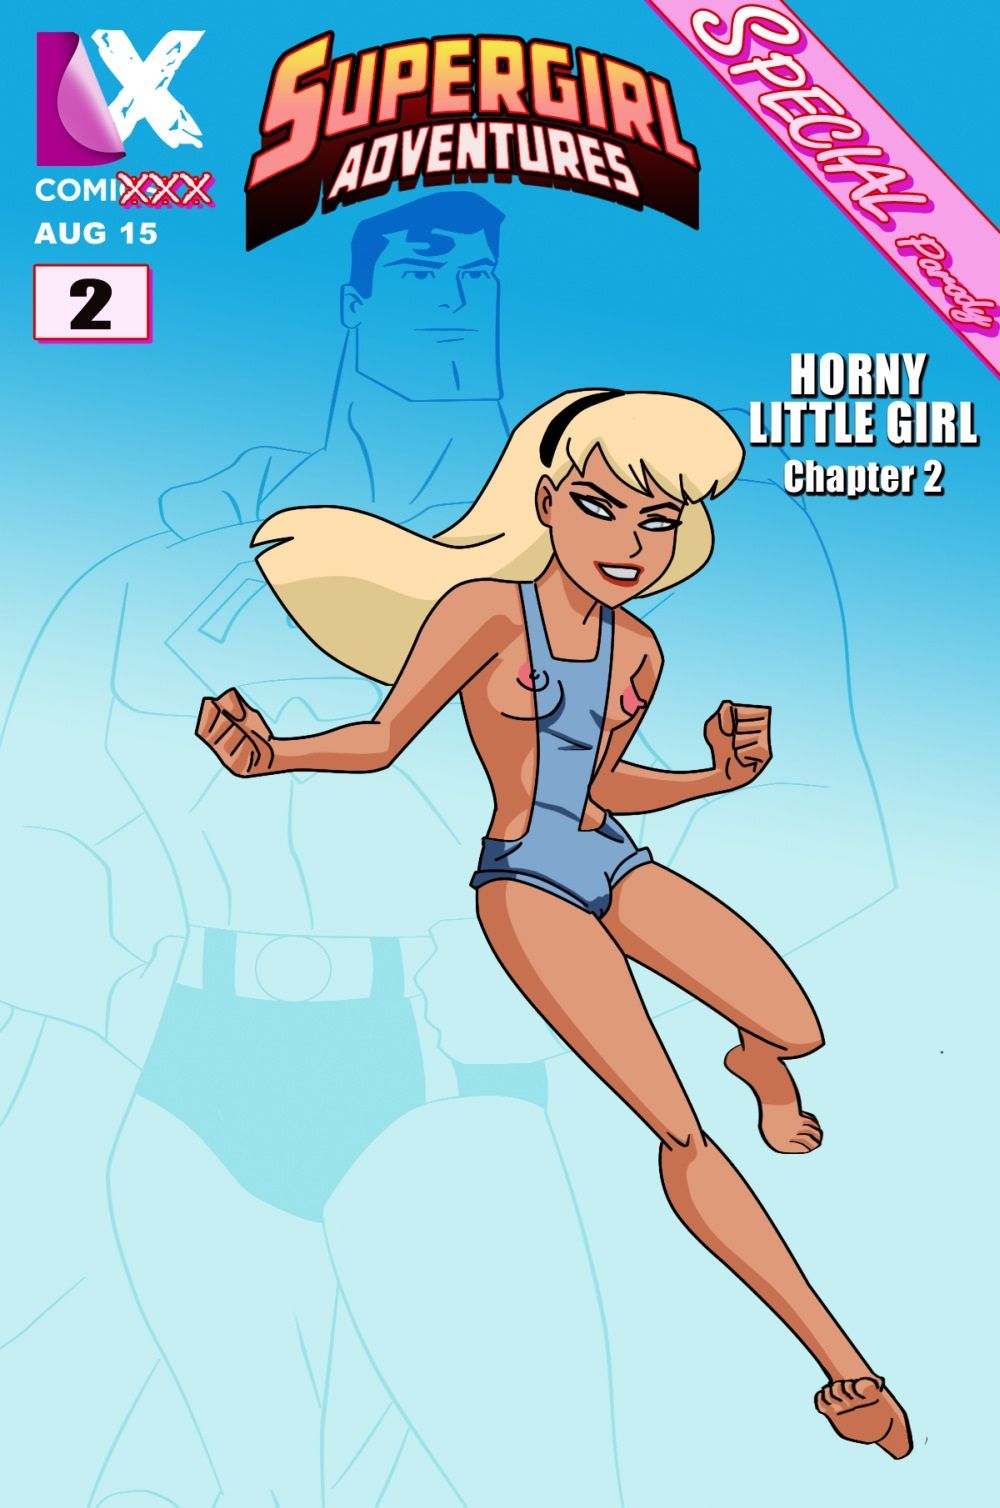 Hent-Supergirl Adventures Ch. 2-Horny Little Girl (Superman) page 1